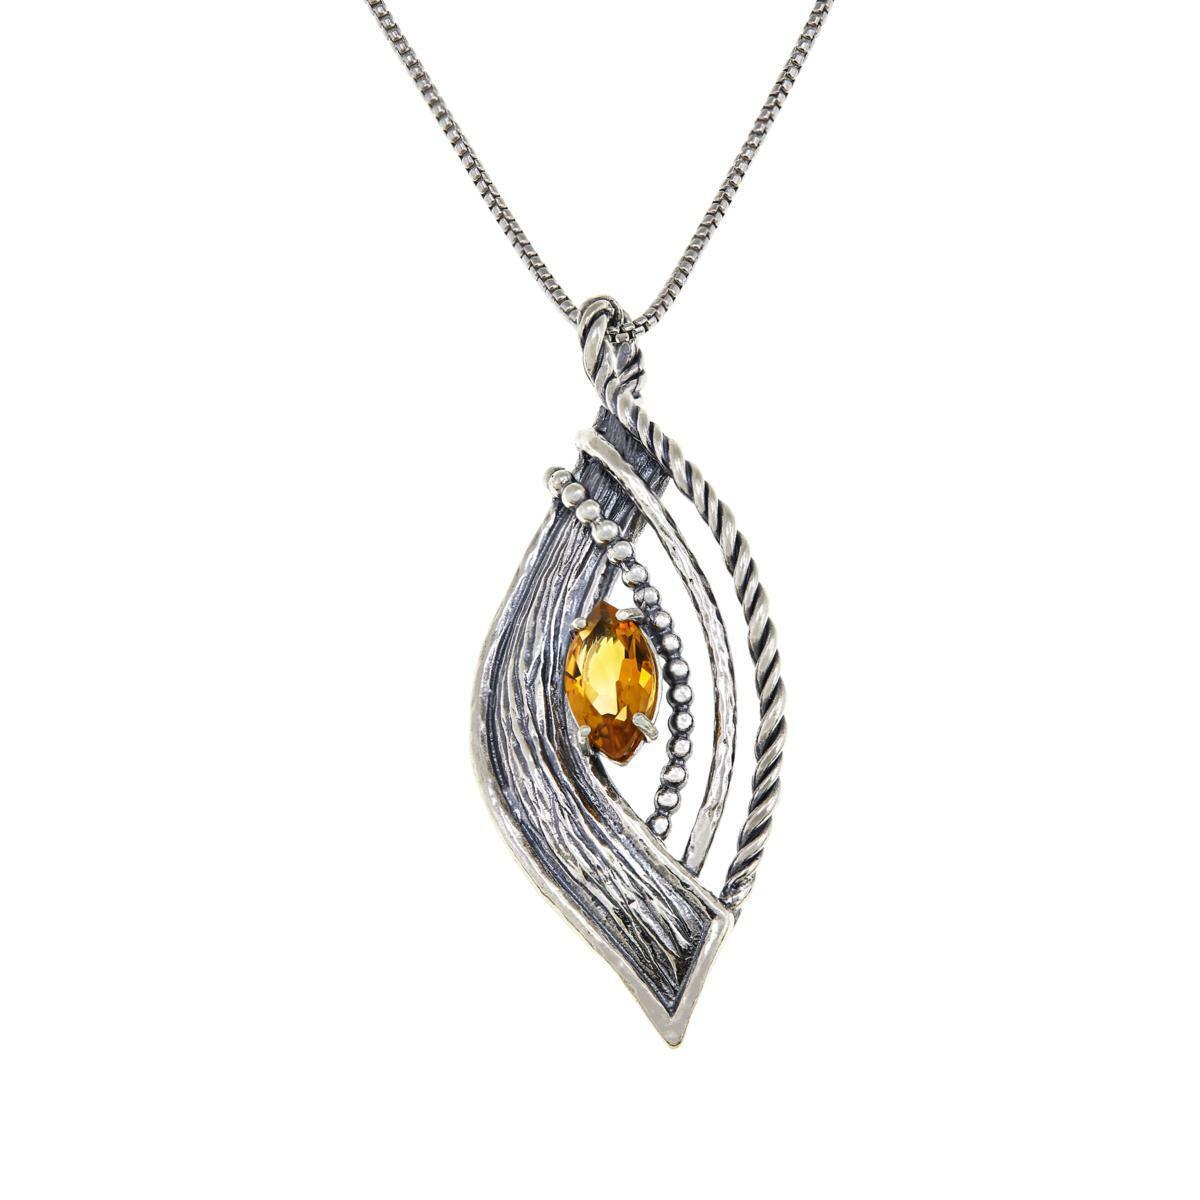 LiPaz Sterling Silver Marquise Citrine Pendant with 18" Chain